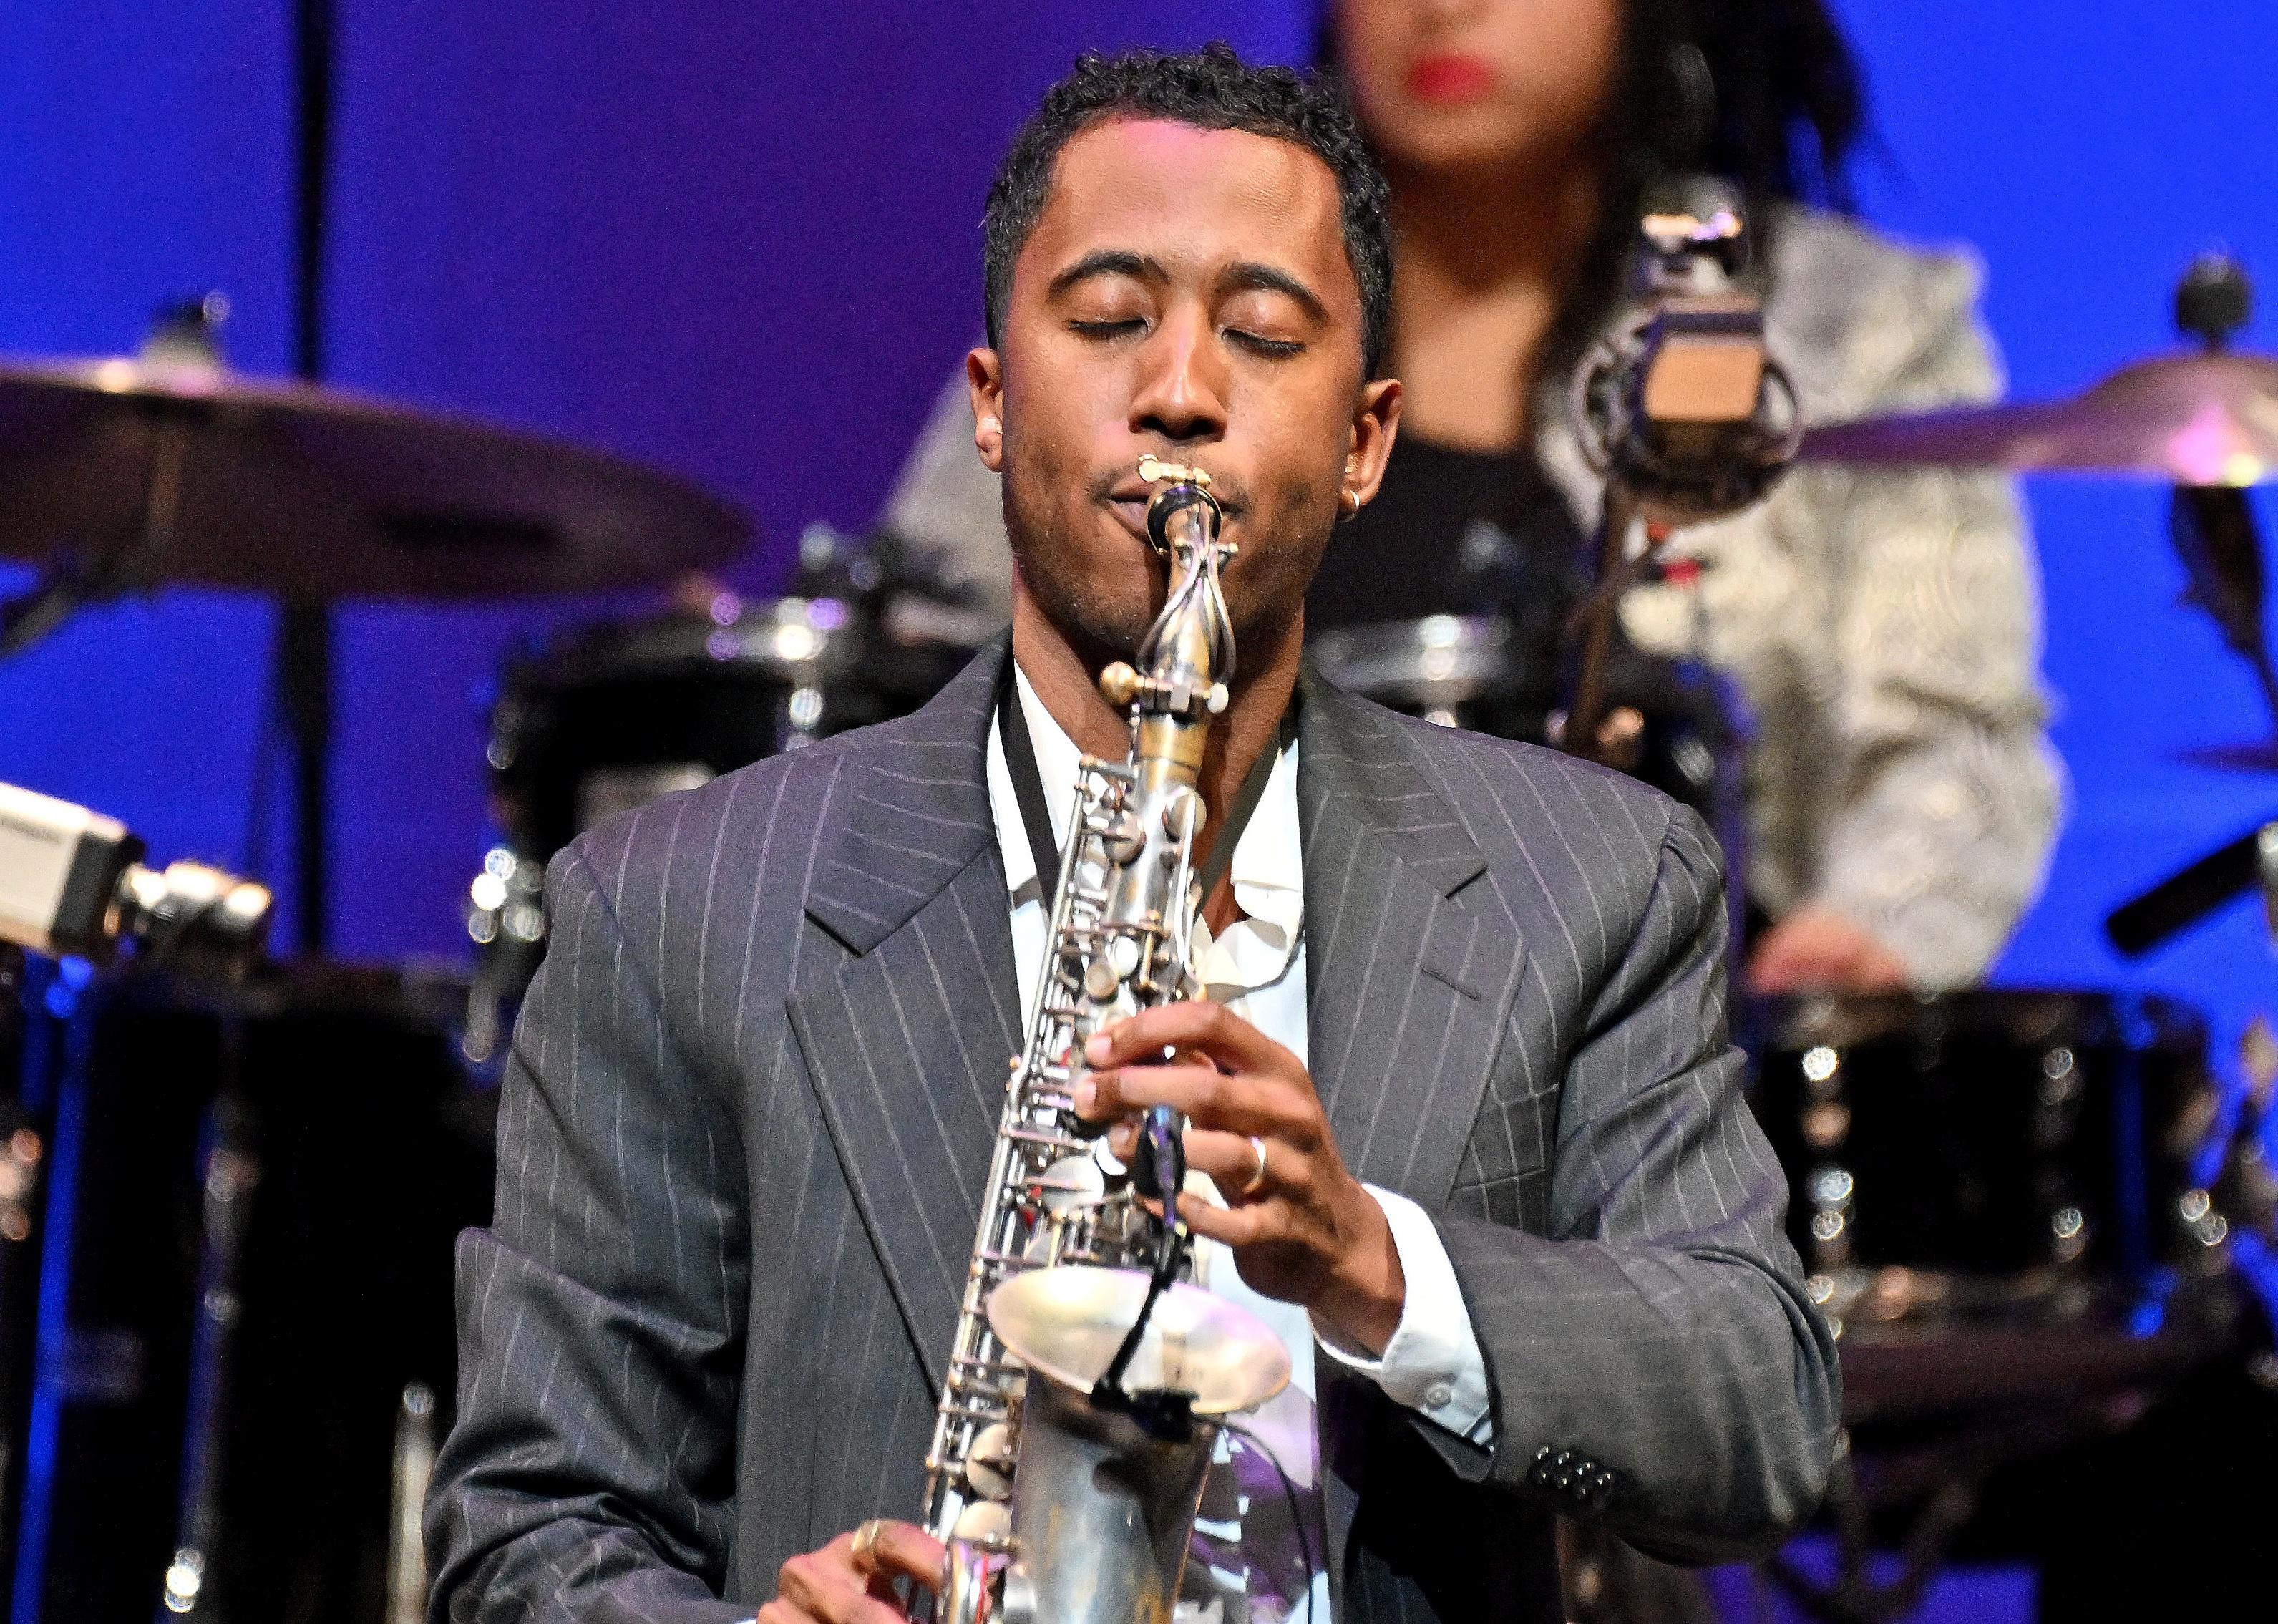 Braxton Cook playing the saxophone onstage.